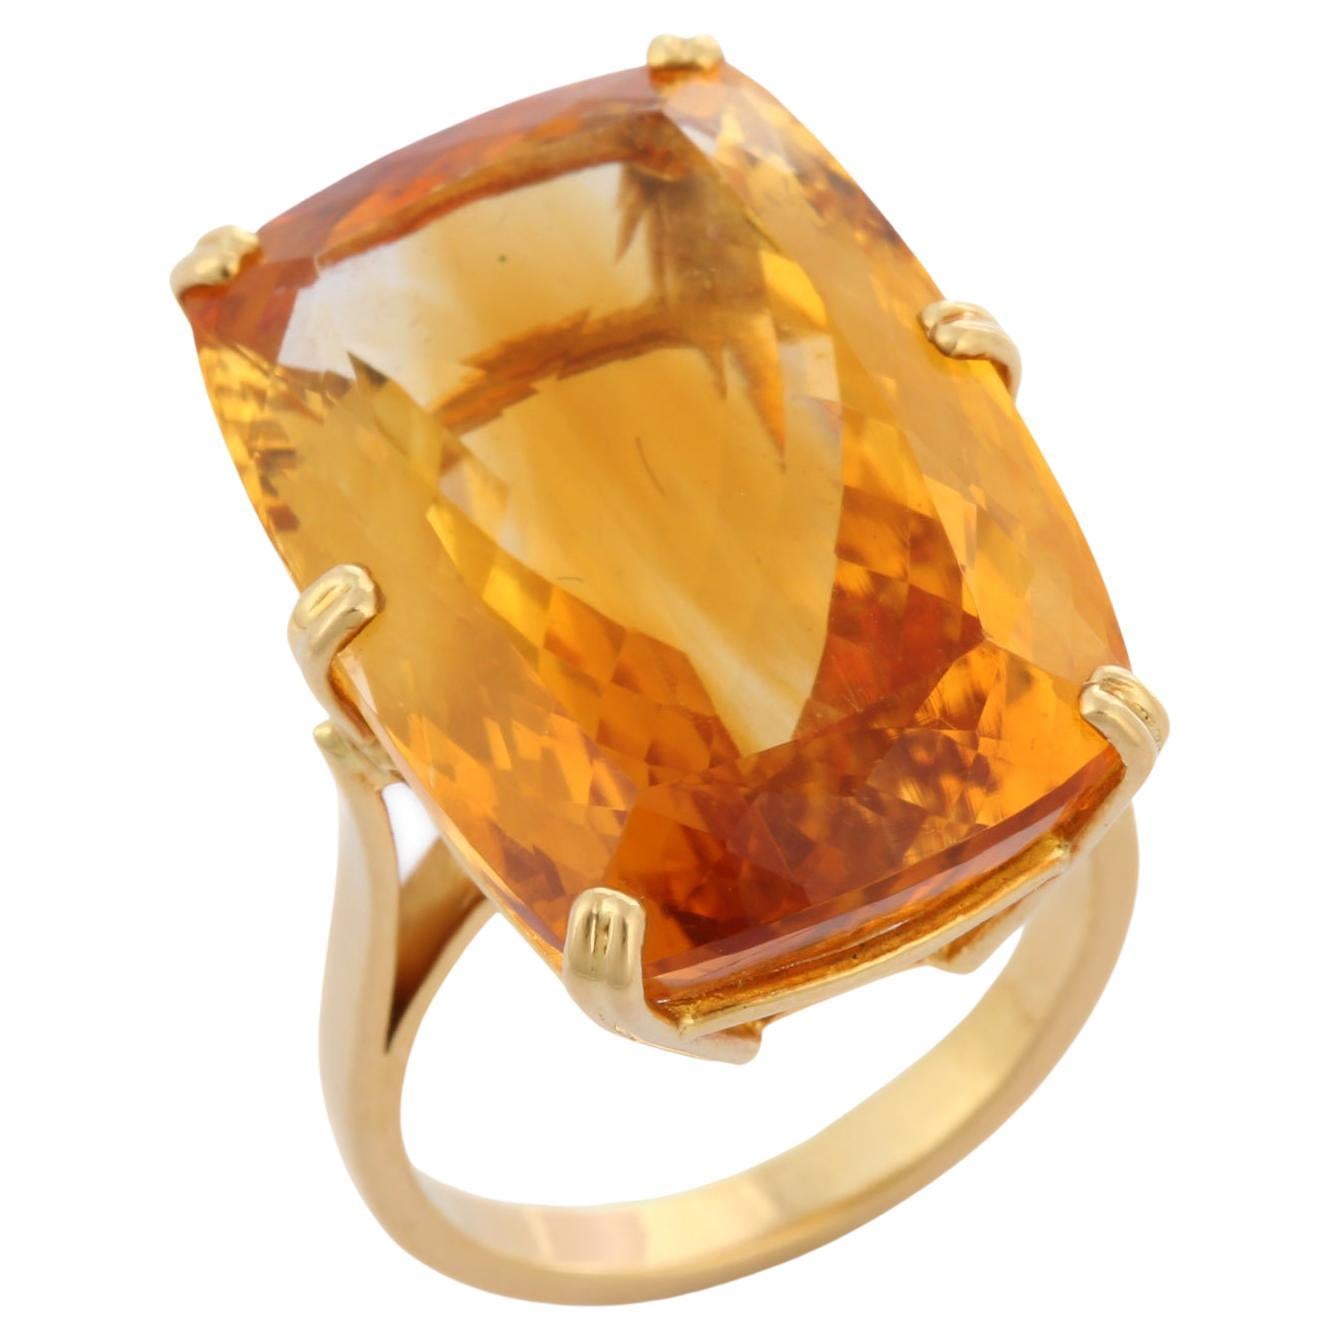 For Sale:  28.8 Ct Cushion Cut Citrine Gemstone Cocktail Ring in 18K Yellow Gold